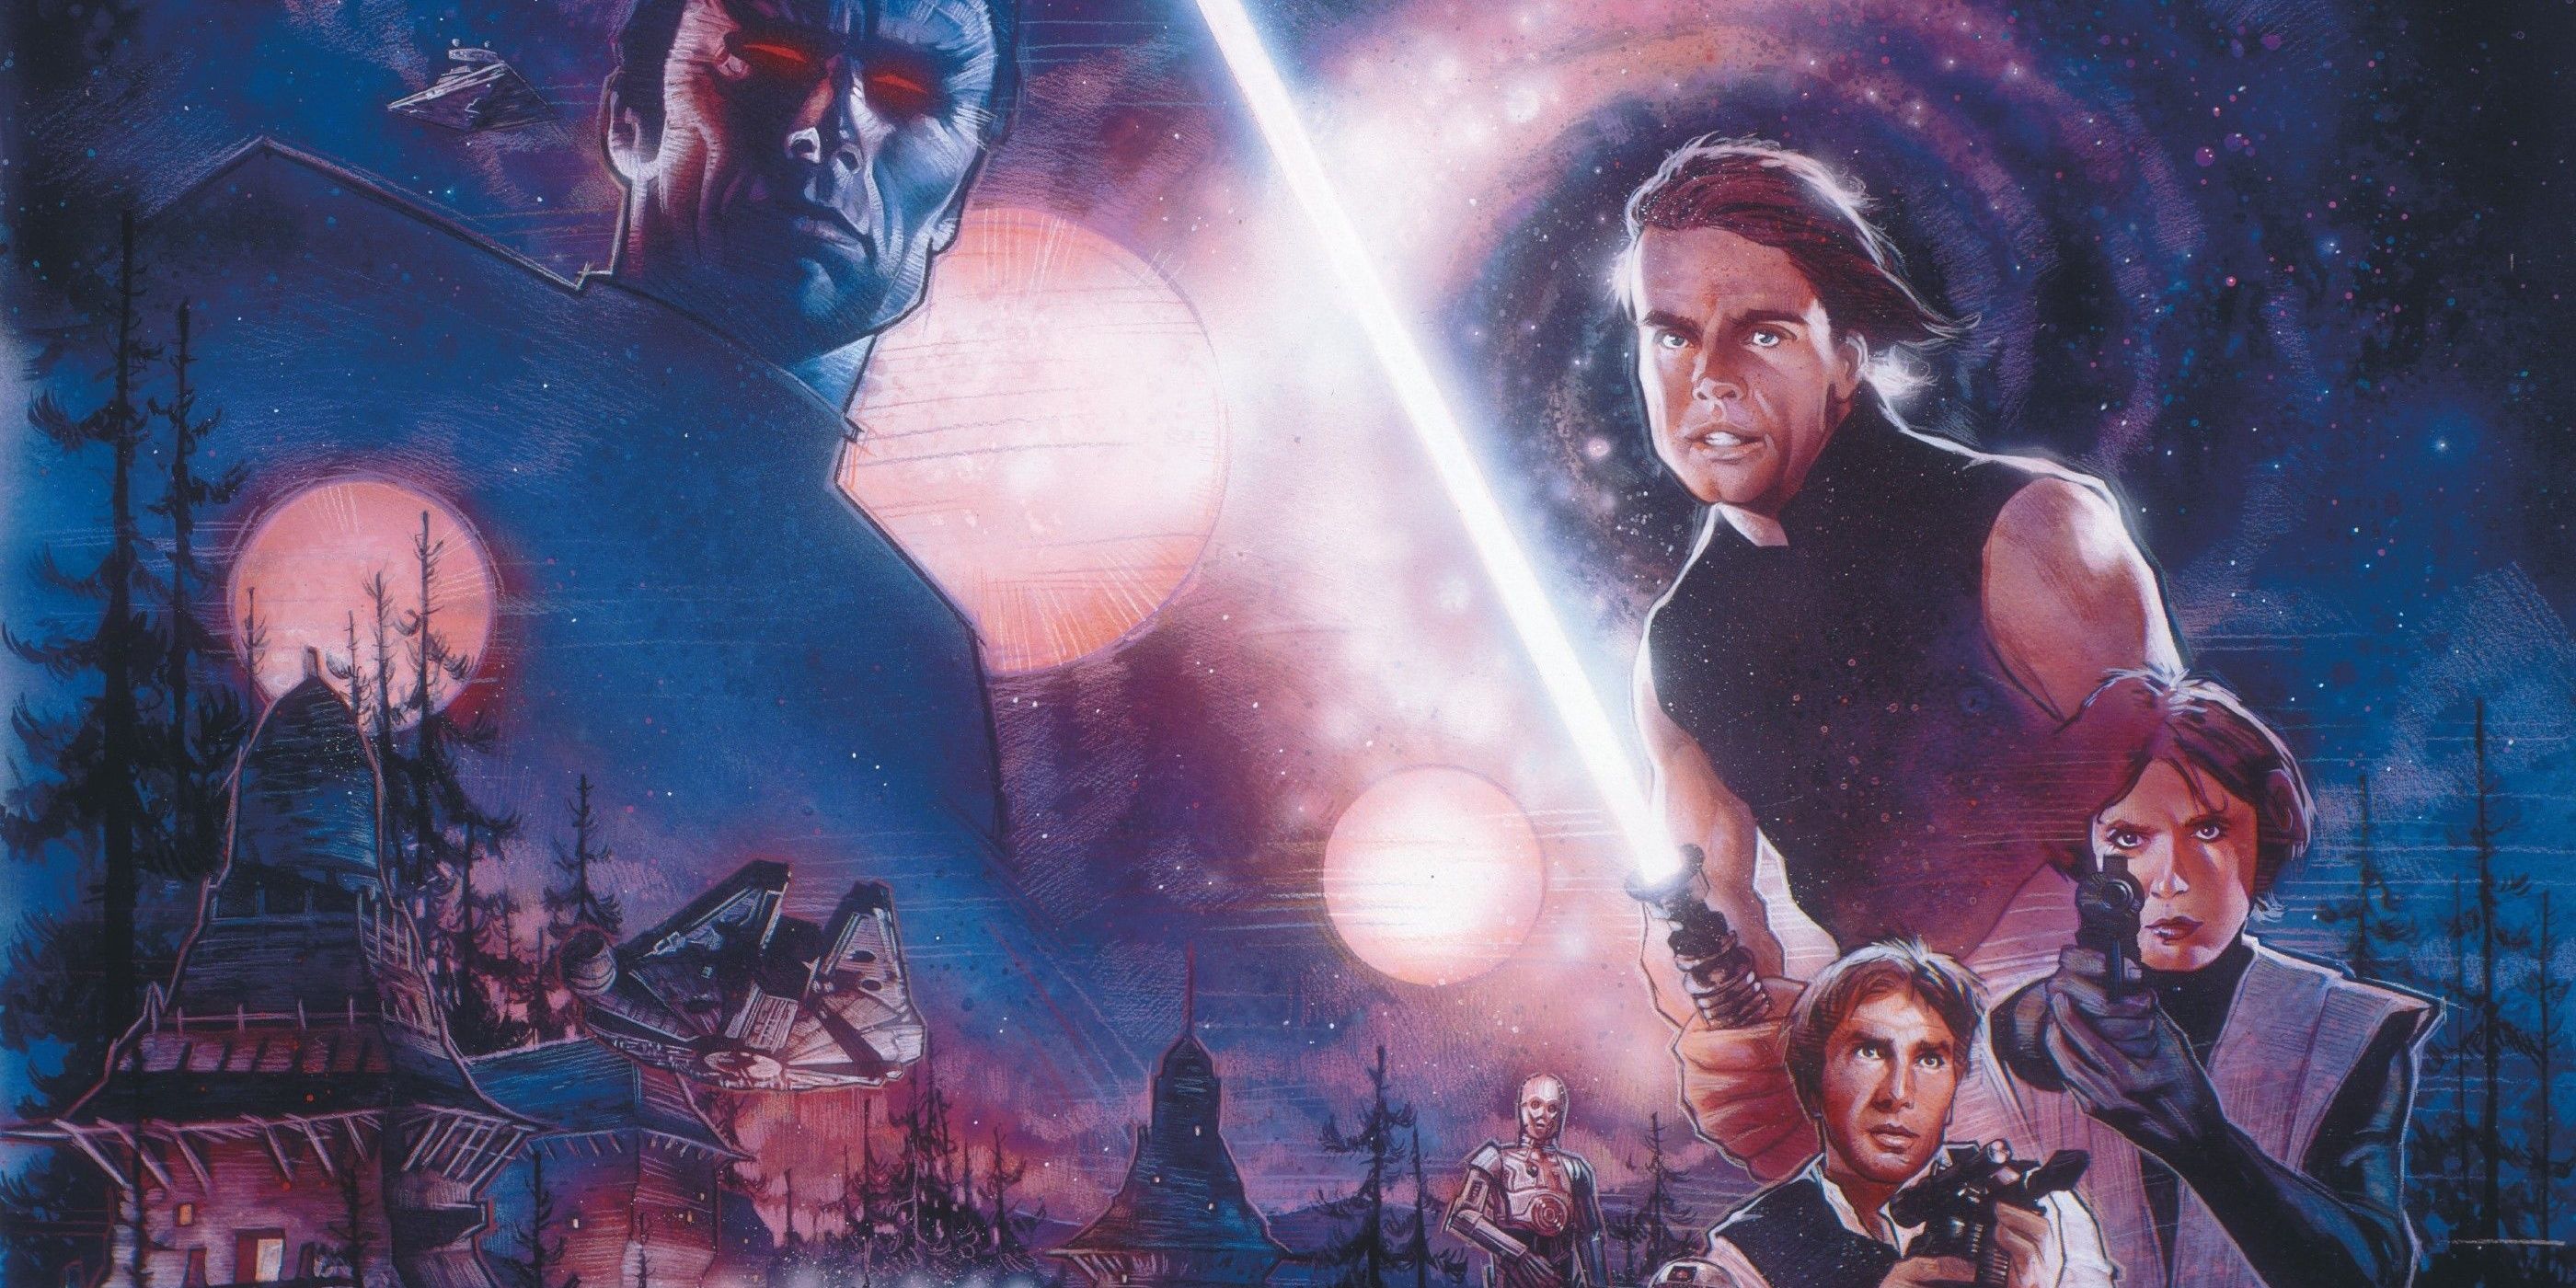 Cover art for Star Wars Heir to the Empire featuring Luke Skywalker holding a lightsaber while General Admiral Thawn looks on 